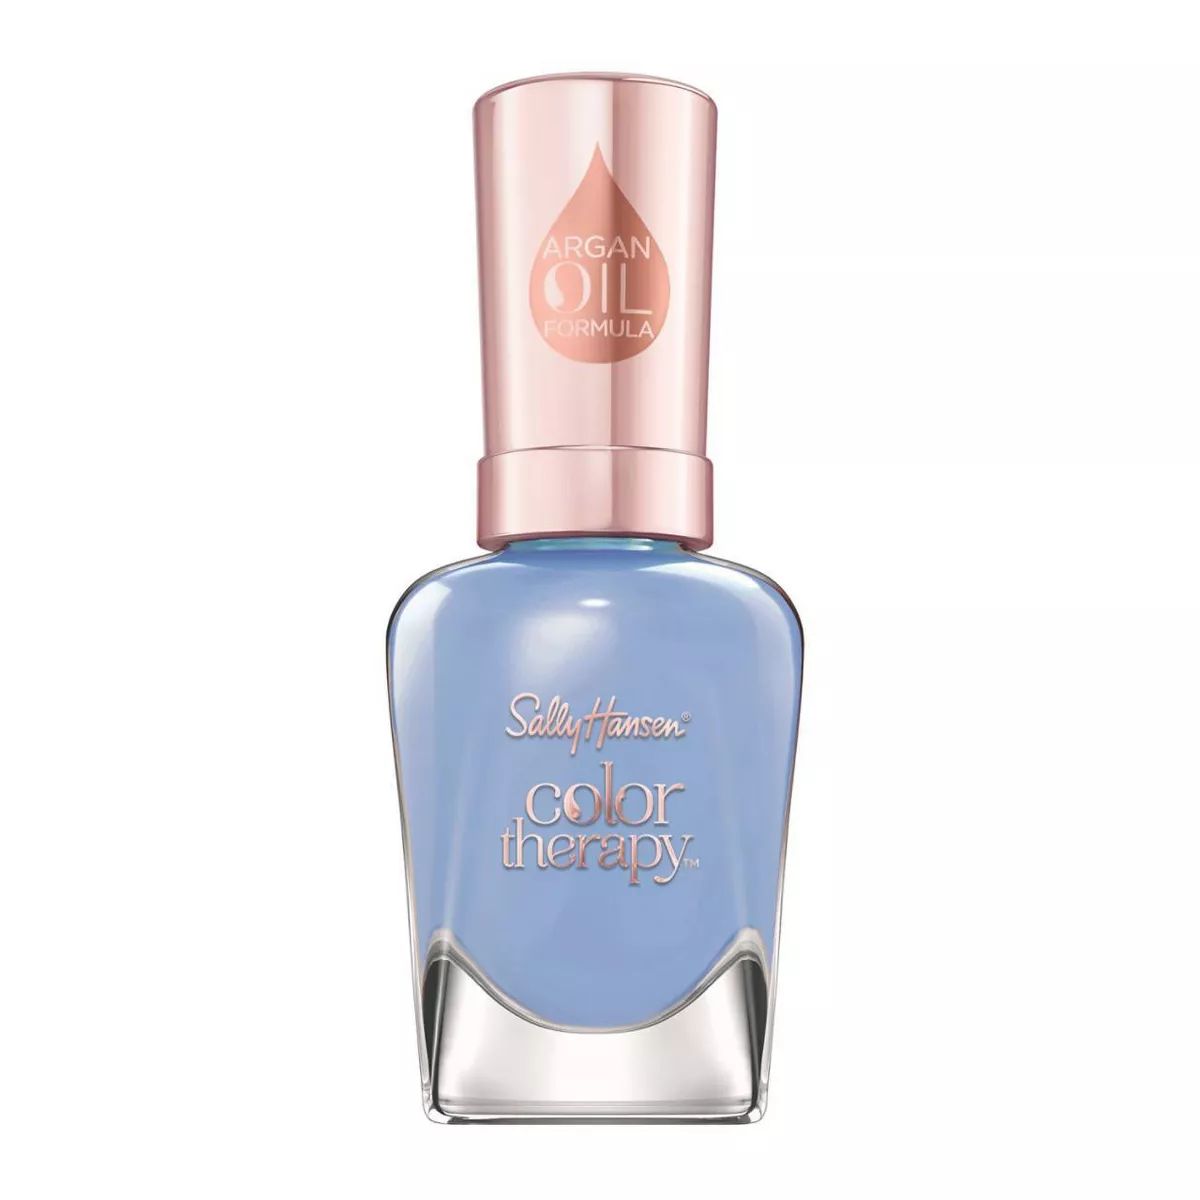 Sally Hansen Color Therapy Nail Polish - 453 Dressed to Chill - 0.5 fl oz | Target